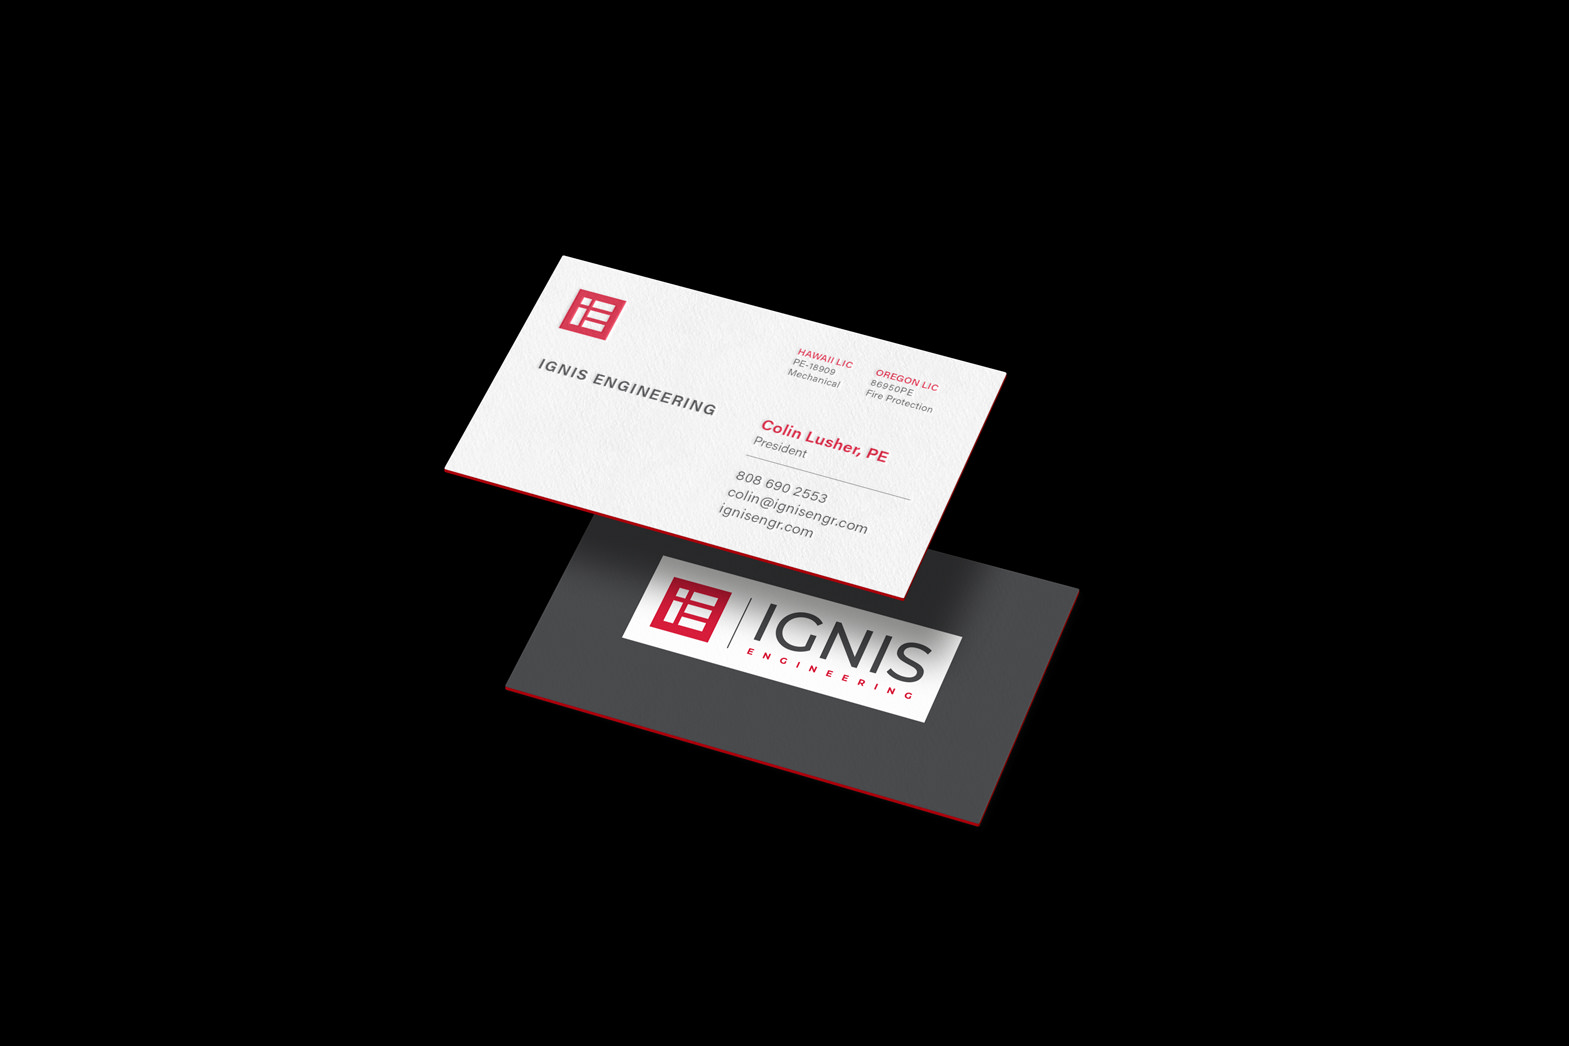 Extra thick business card design with a red painted edge